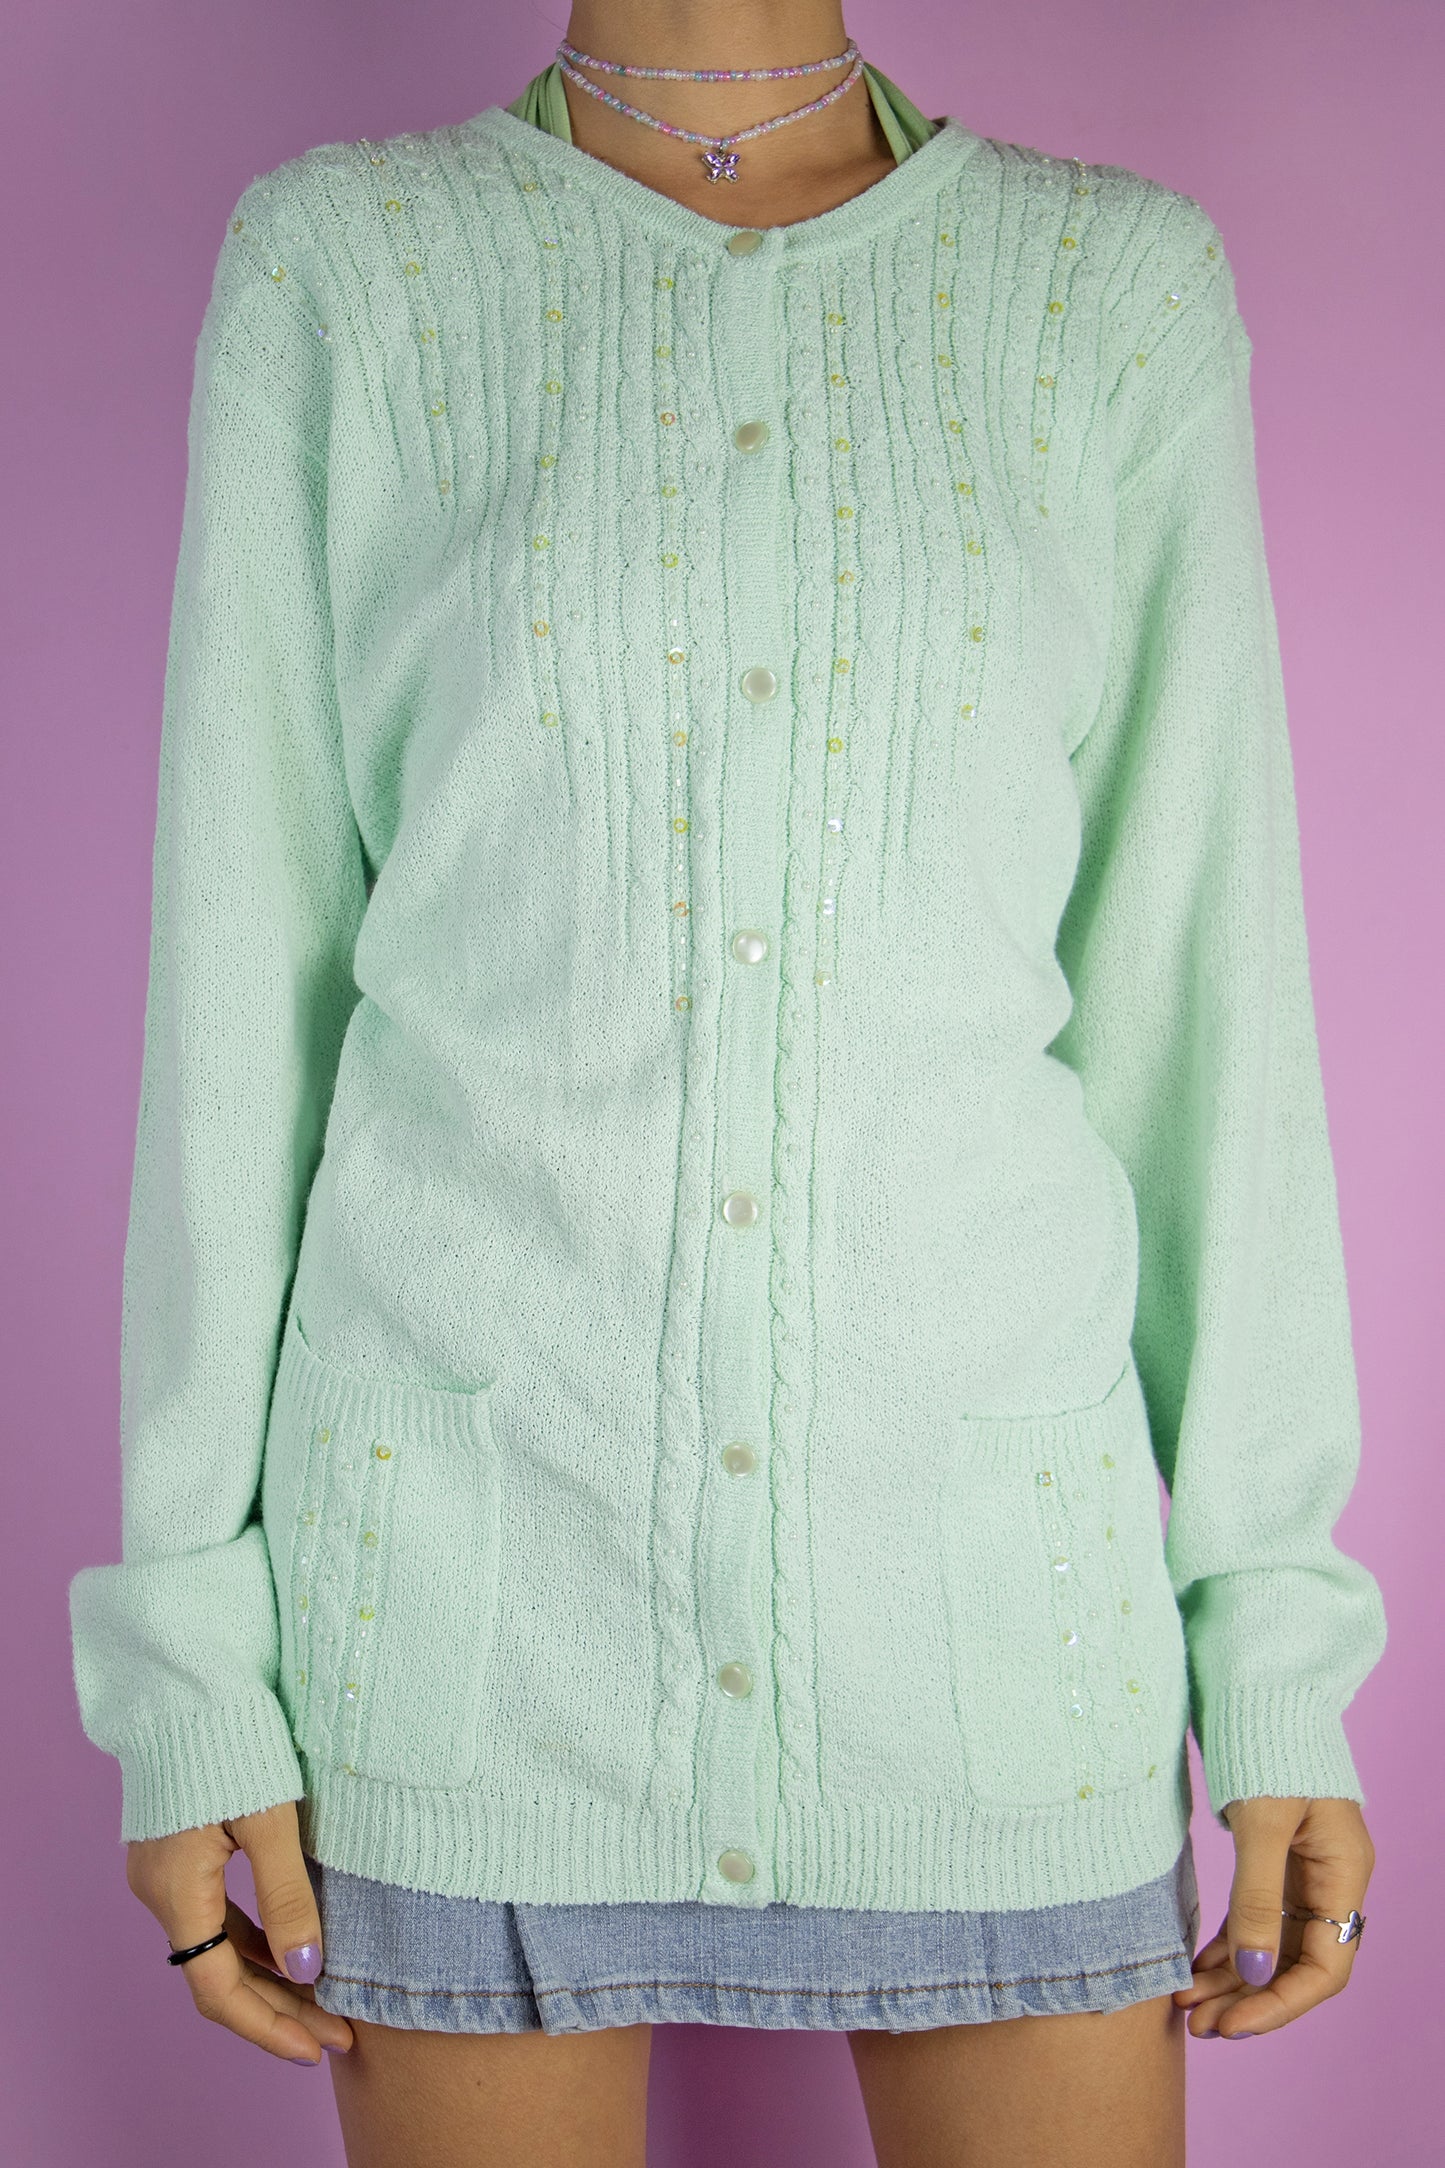 The Y2K Green Beaded Cardigan is a vintage light pastel mint green embellished cardigan with pockets and bead and sequin detail. Looks cute when worn oversized. Lovely retro 2000s knit sweater.